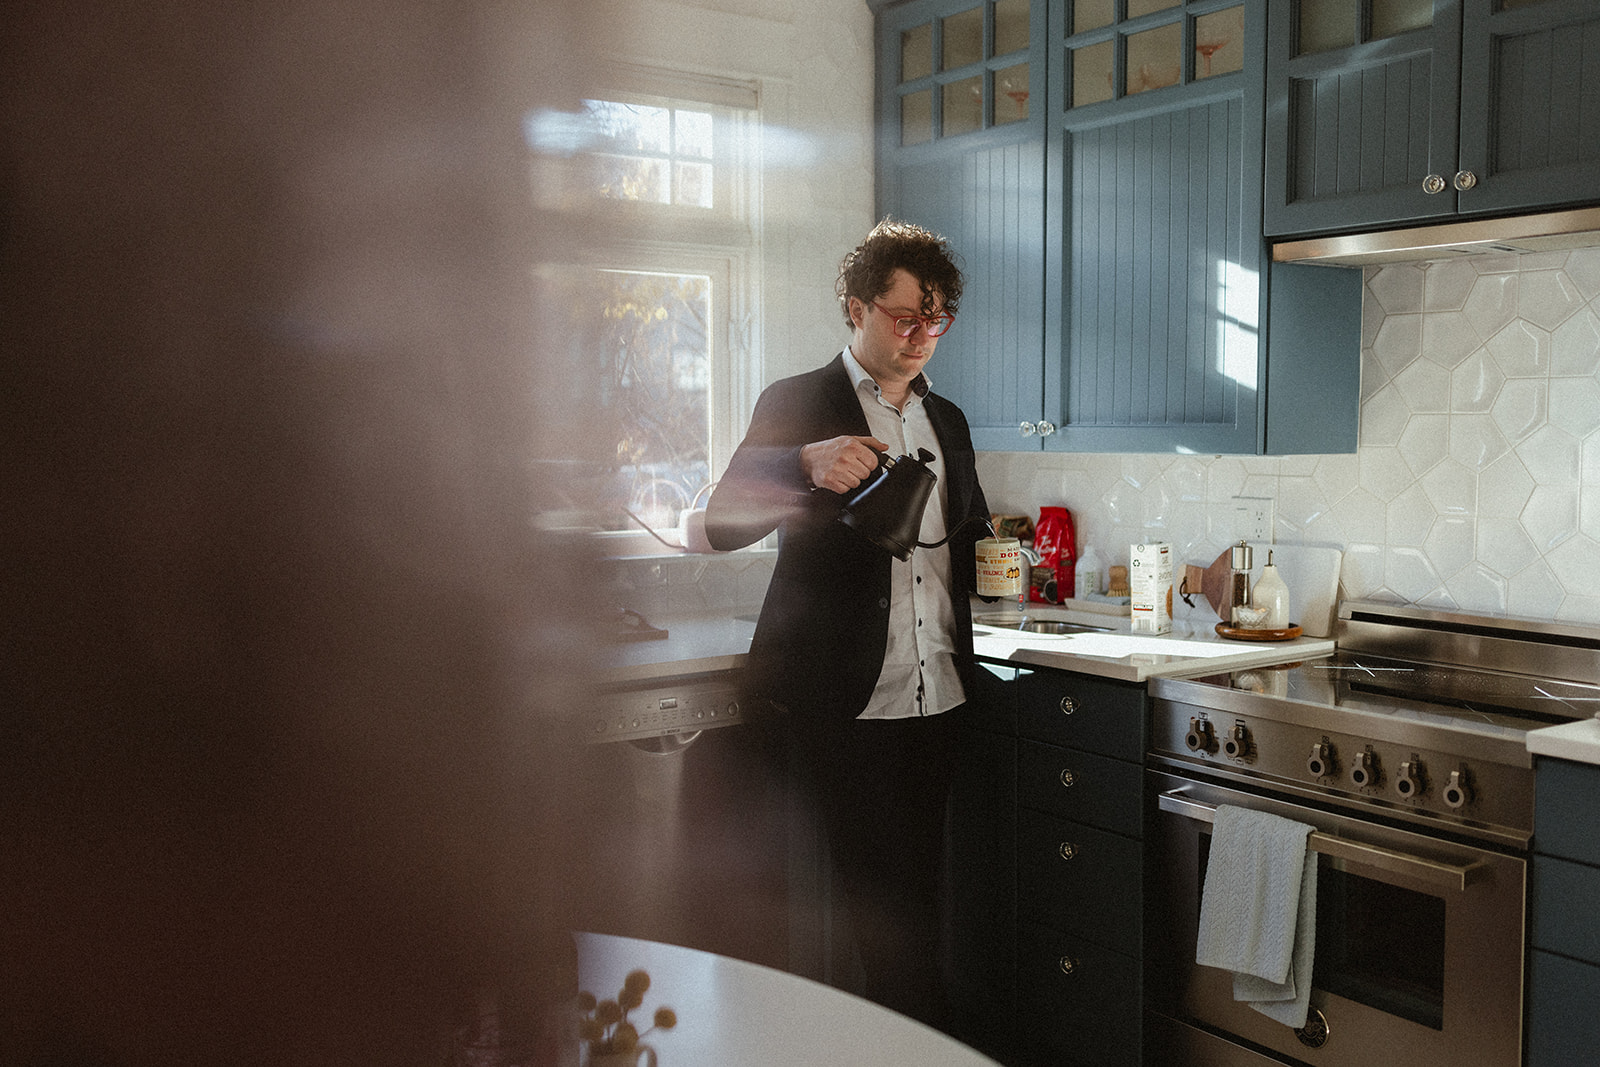 young man pouring coffee into a mug in his kitchen